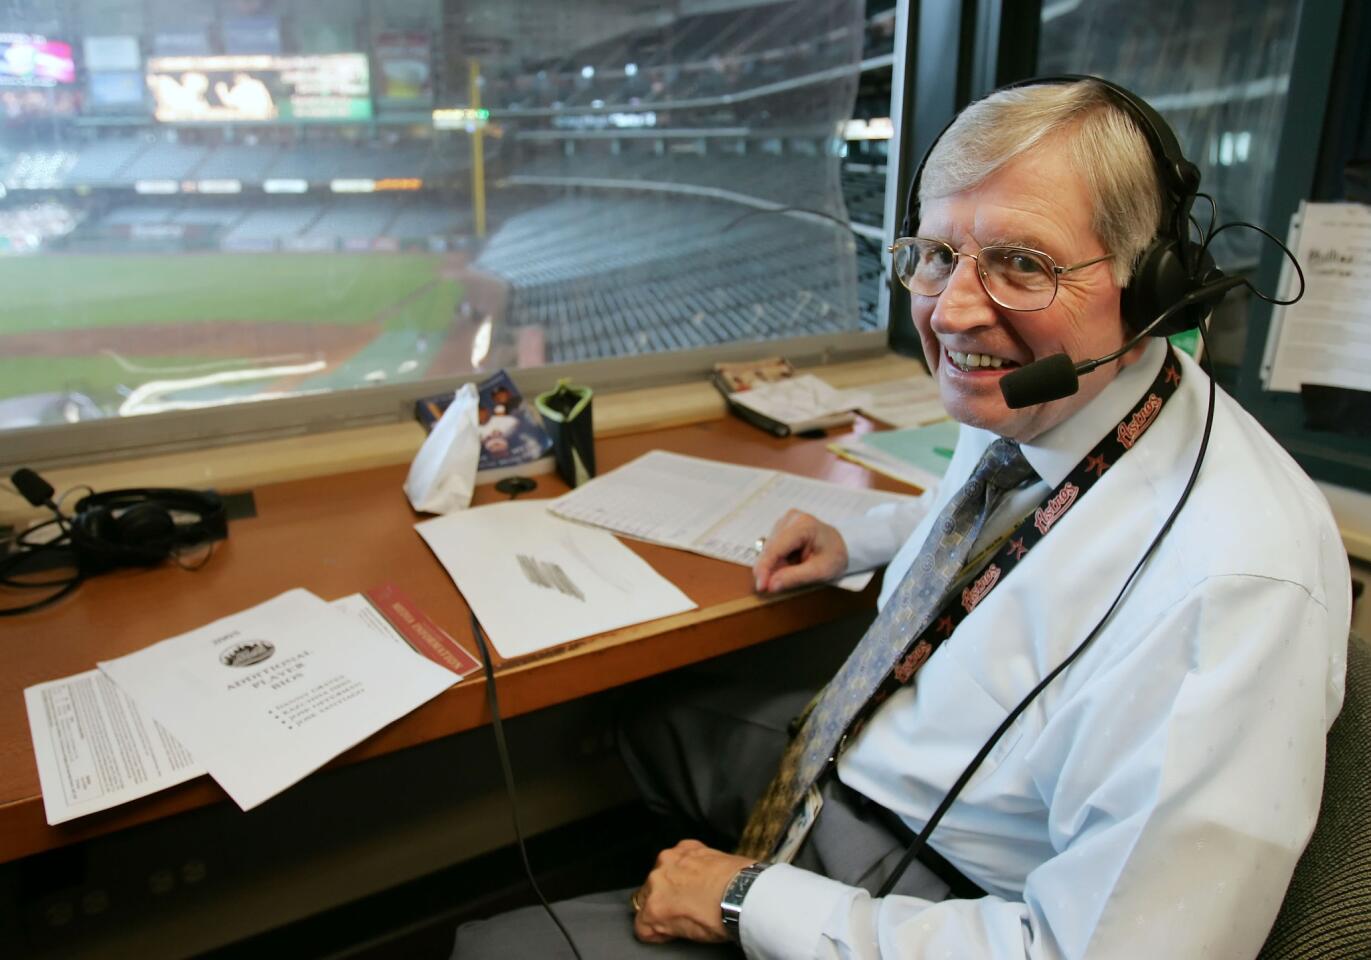 Hall of Fame broadcaster Milo Hamilton, who broadcasted Cubs and White Sox games and was the longtime play-by-play radio voice of the Astros, died Sept. 17, 2015, in Houston at 88. Read the obituary.